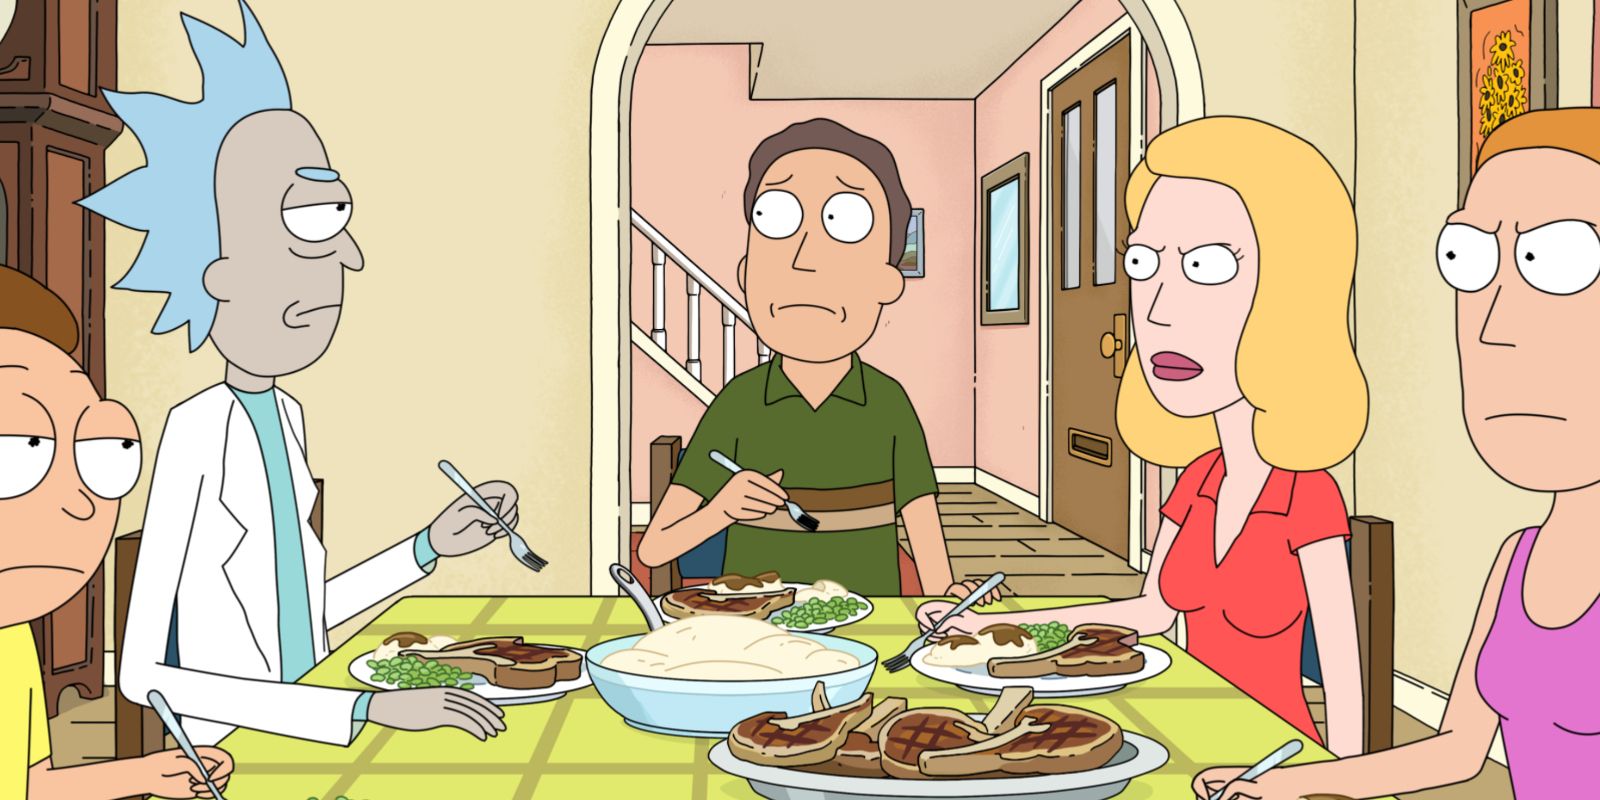 The Smith family in Rick and Morty